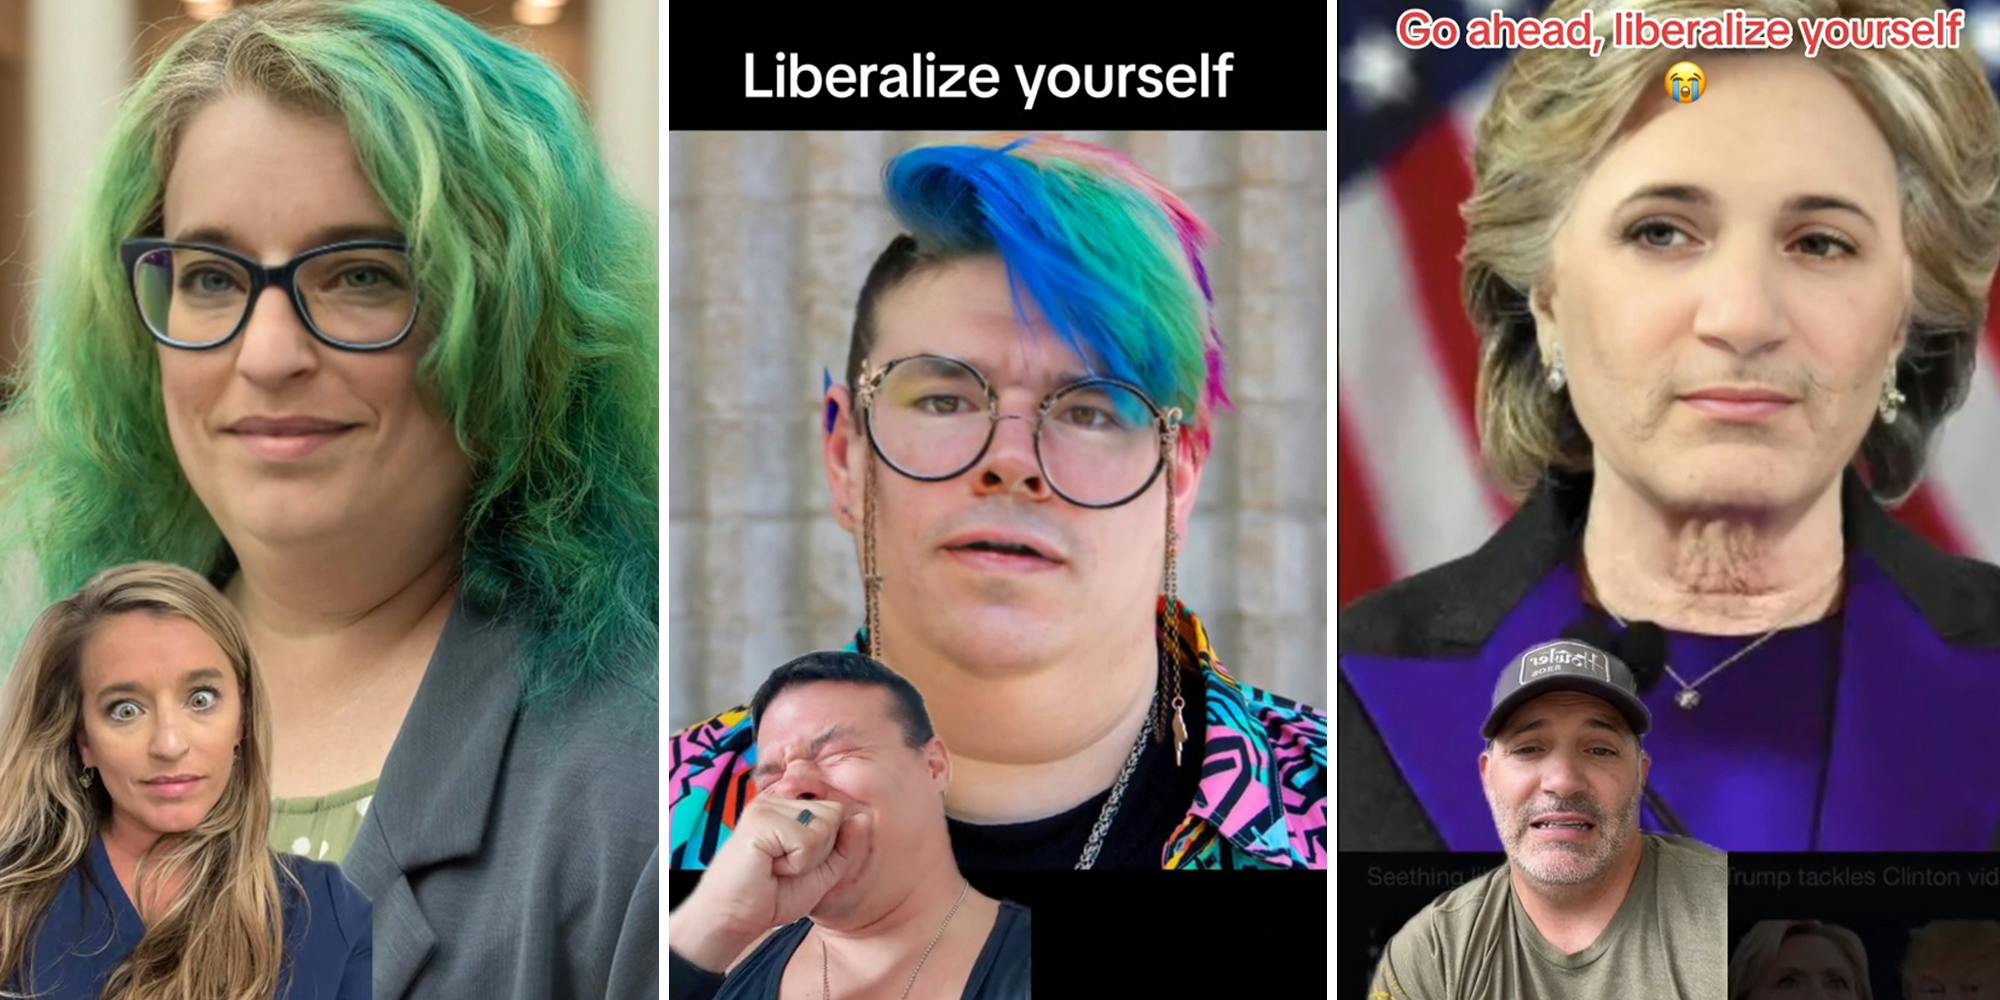 ‘Liberalize Yourself’: TikTok filter uses real people’s faces to make TikTokers into blue-haired leftists